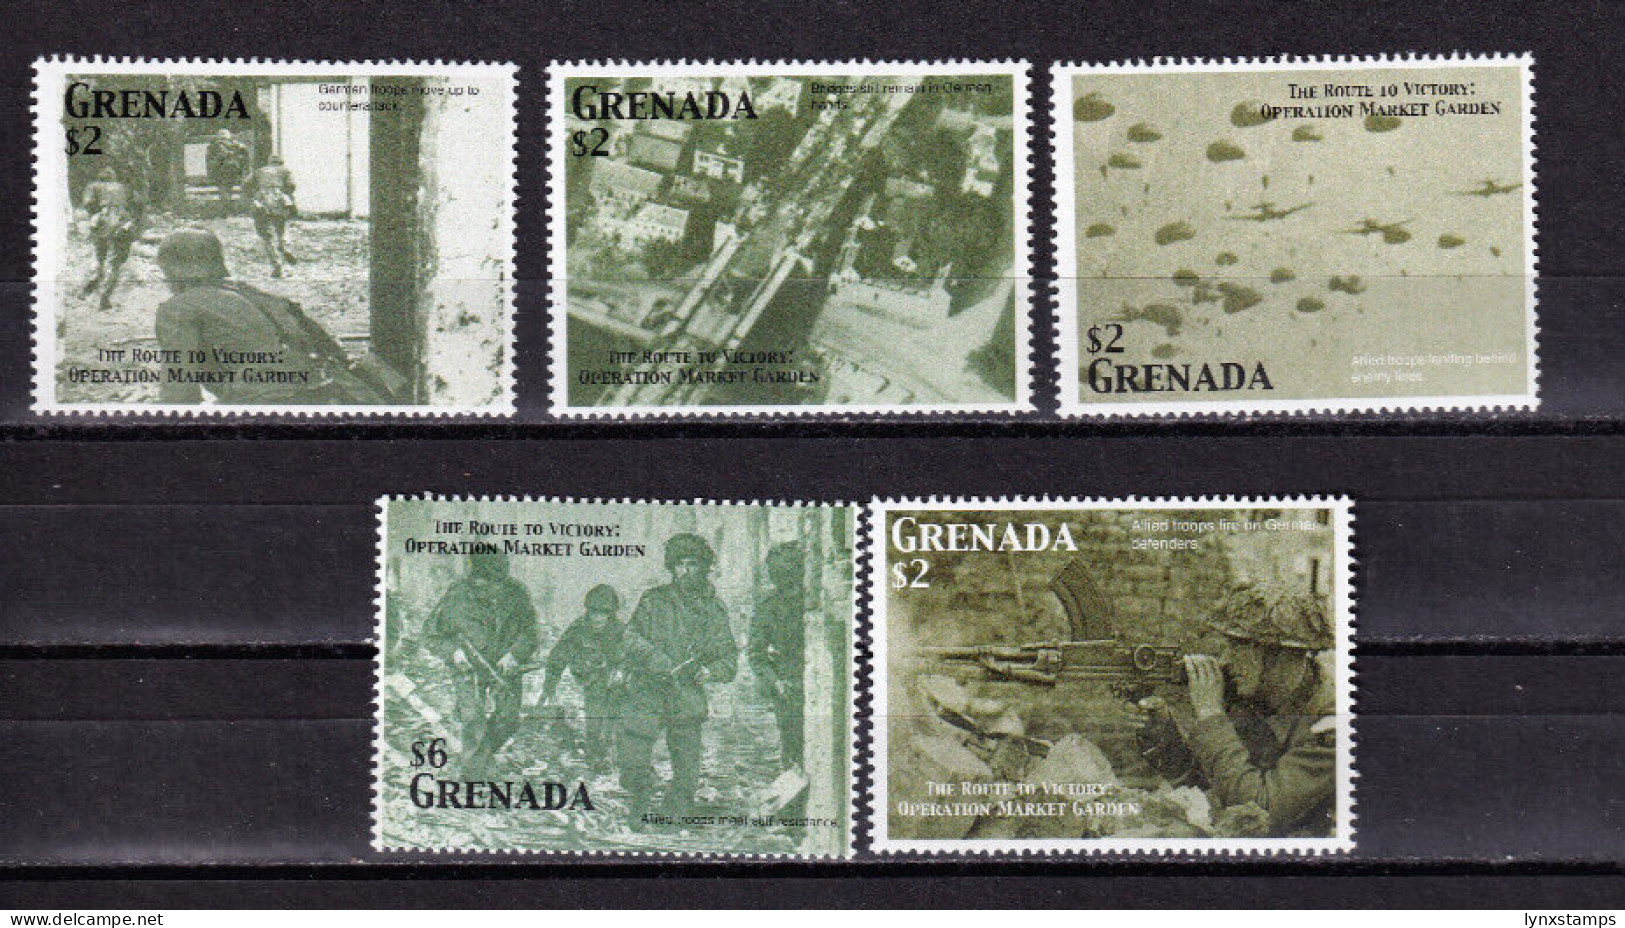 LI06 Grenada 2005 The 60th Anniv Of The End Of WW II-"The Route To Victory" - Grenade (1974-...)